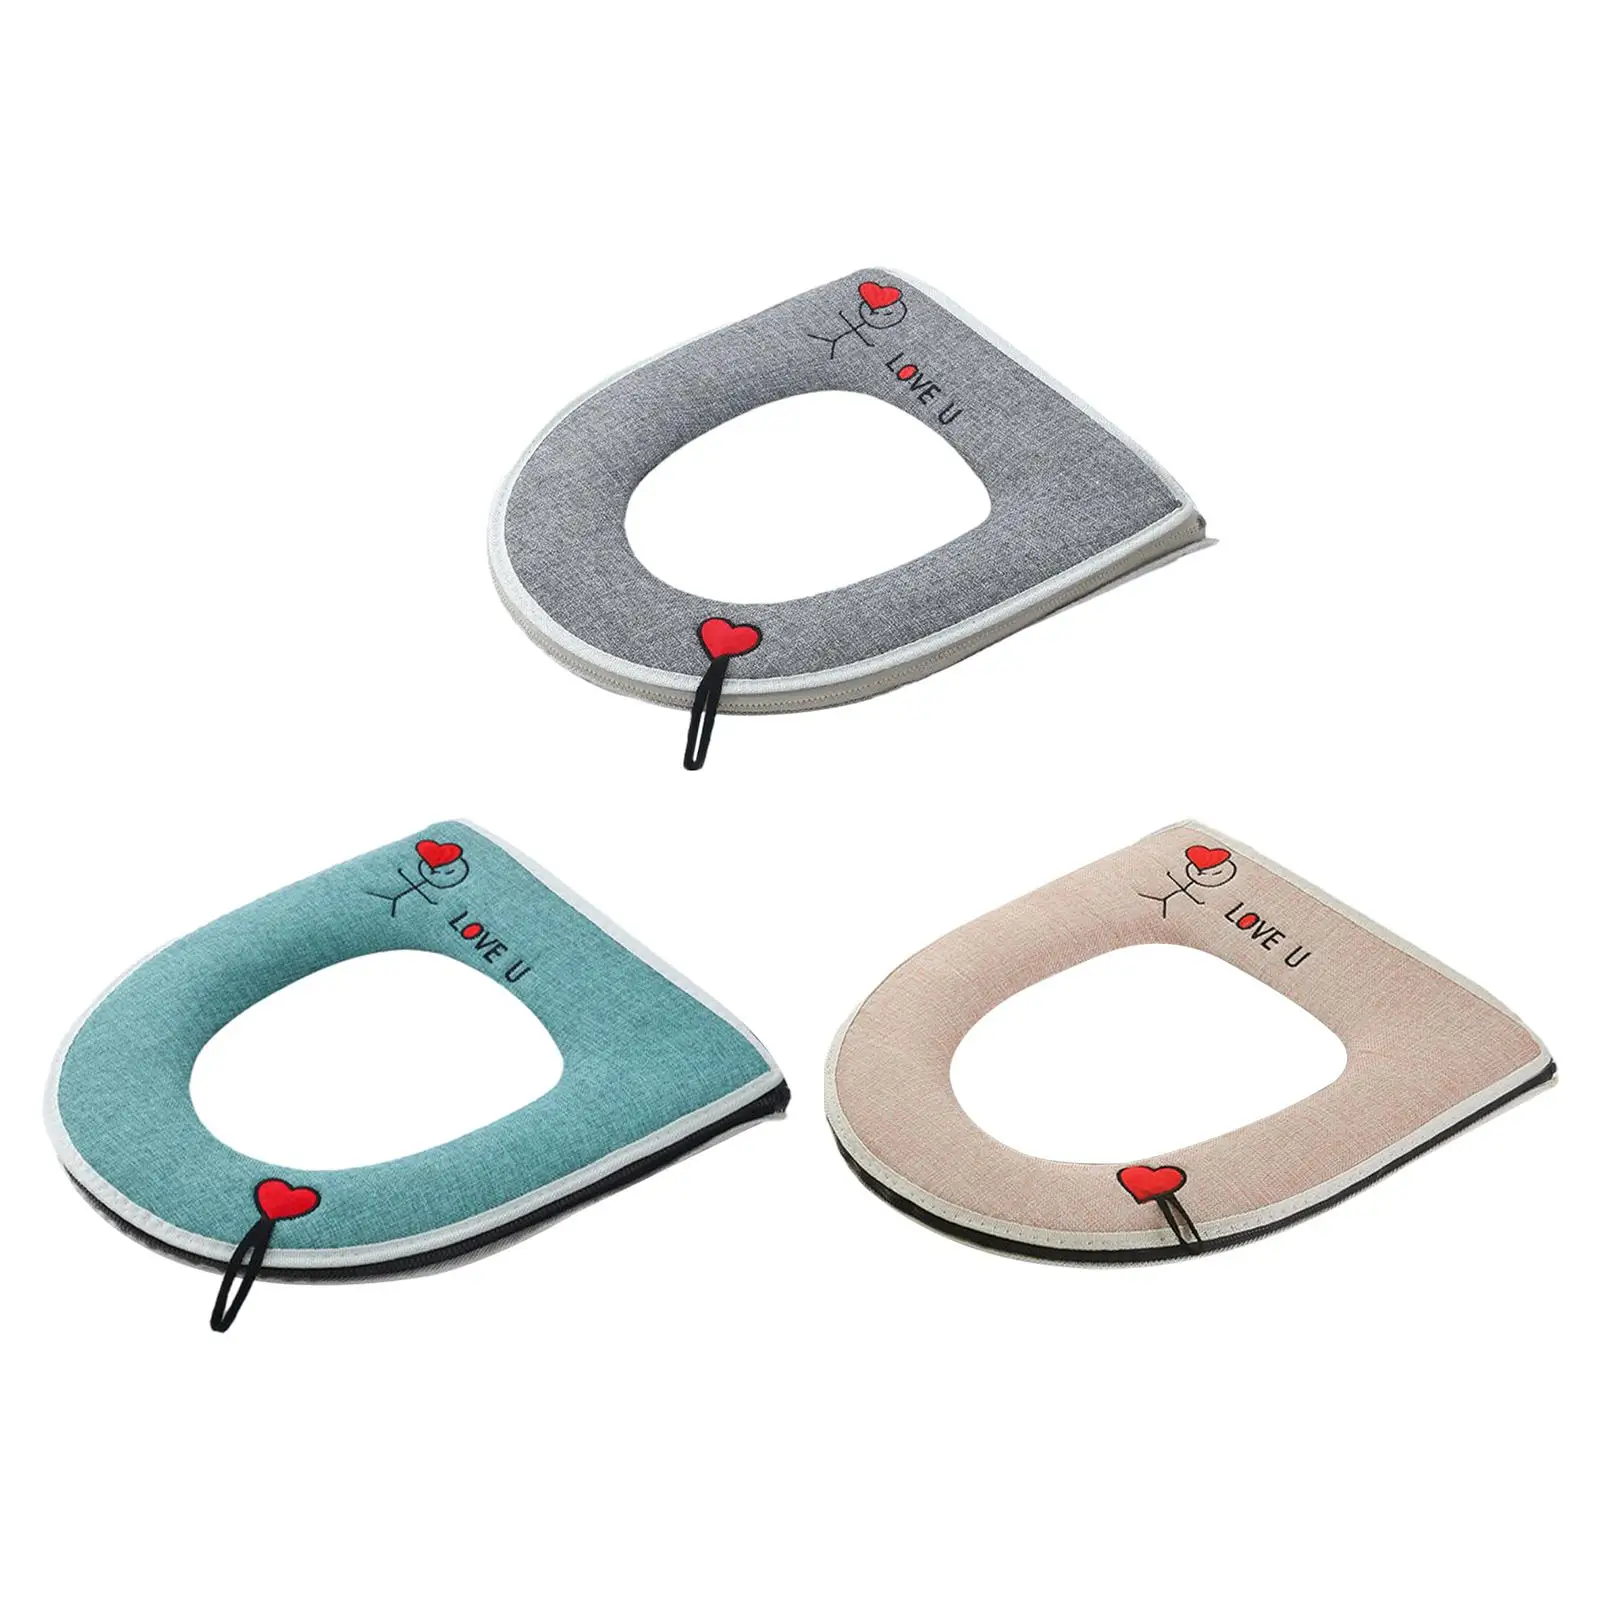 Thicken Toilet Seat Cushion Breatheable Universal Toilet Seat Mat Toilet Seat Cover Pads for Bathroom Traveling Hotel Household